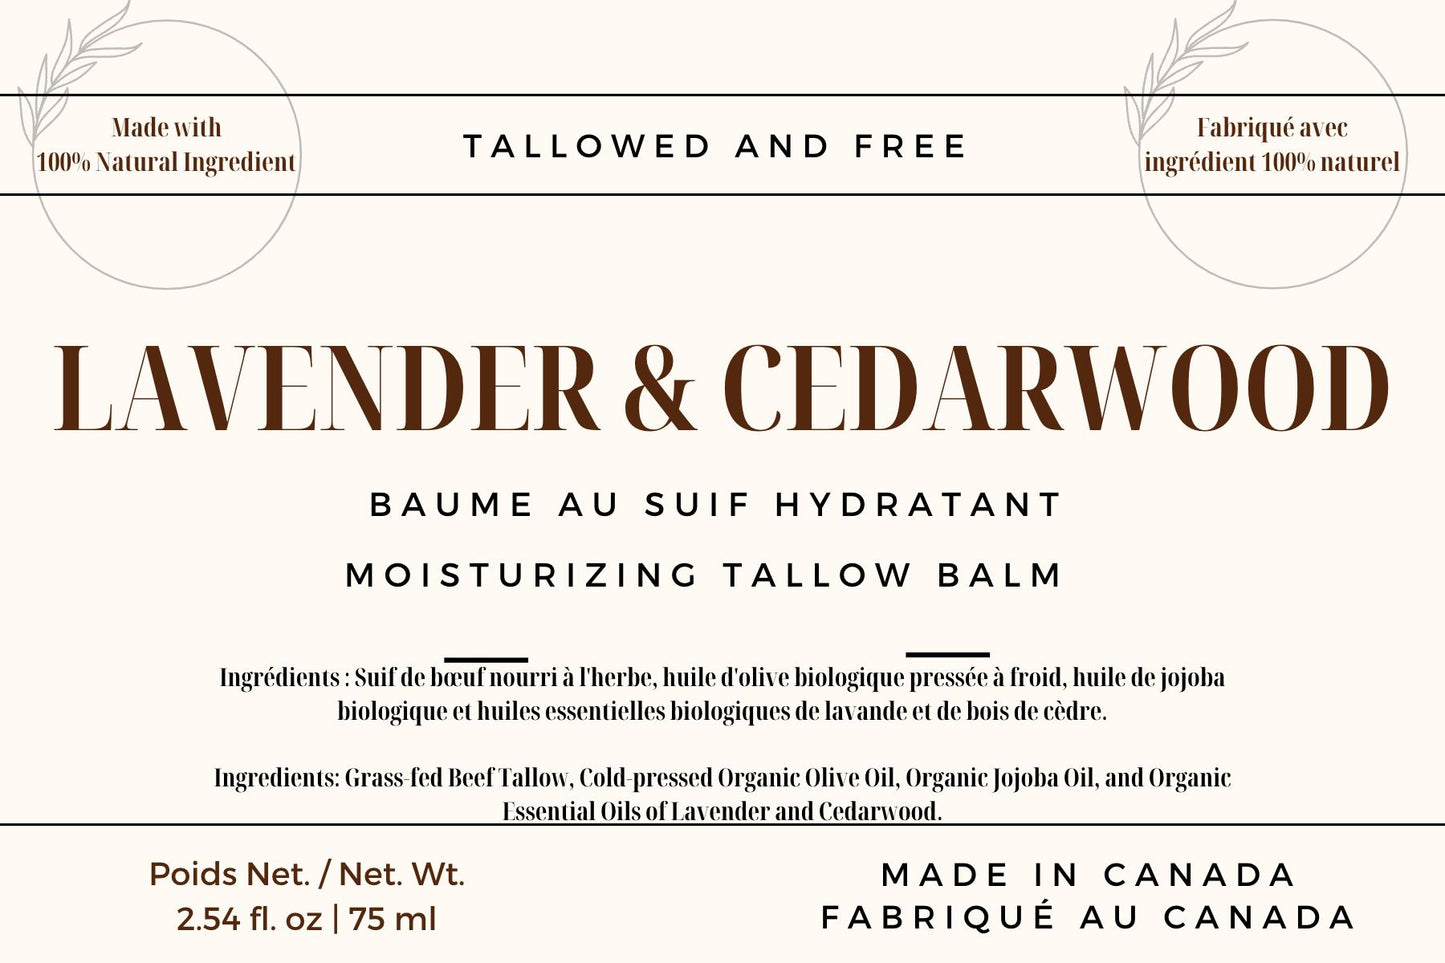 Lavender & Cedarwood Tallow Balm: Made with Grass-fed Beef Tallow and Organic Ingredients - 75 ml